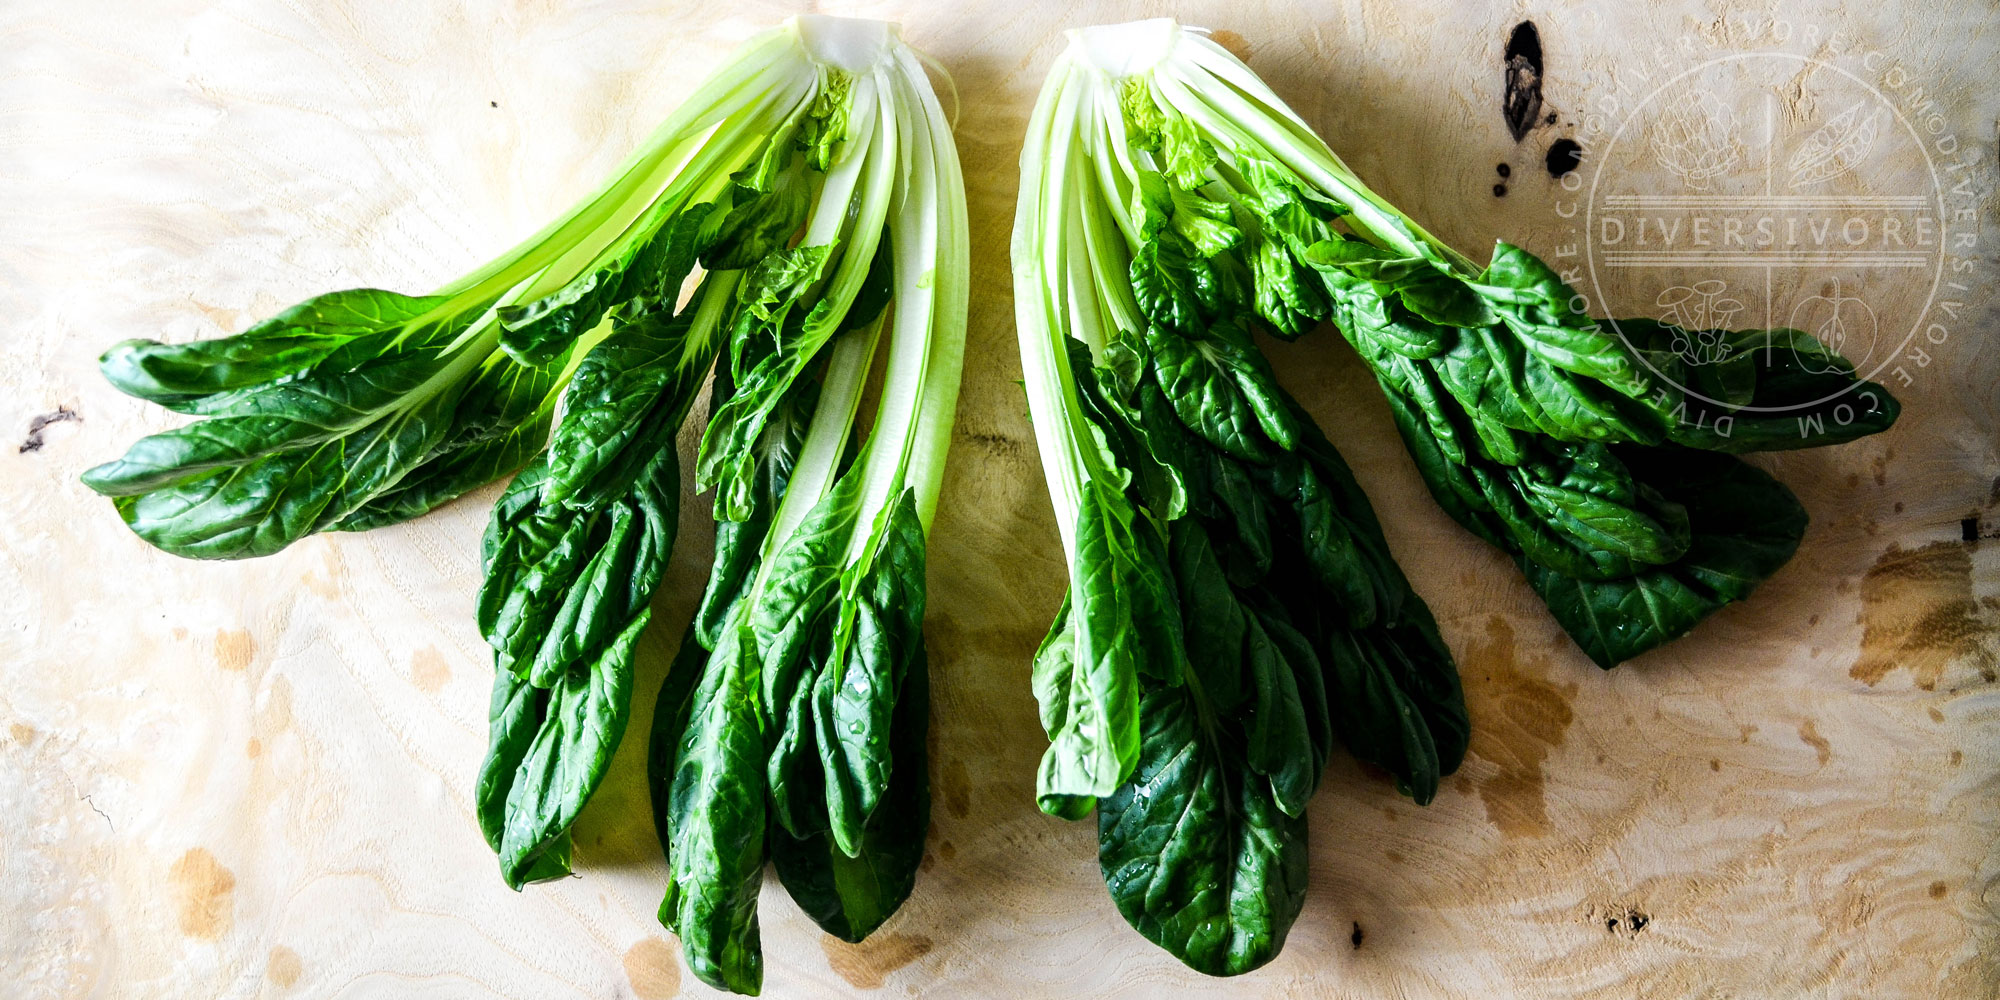 Featured image for “Tatsoi (Rosette Bok Choy)”